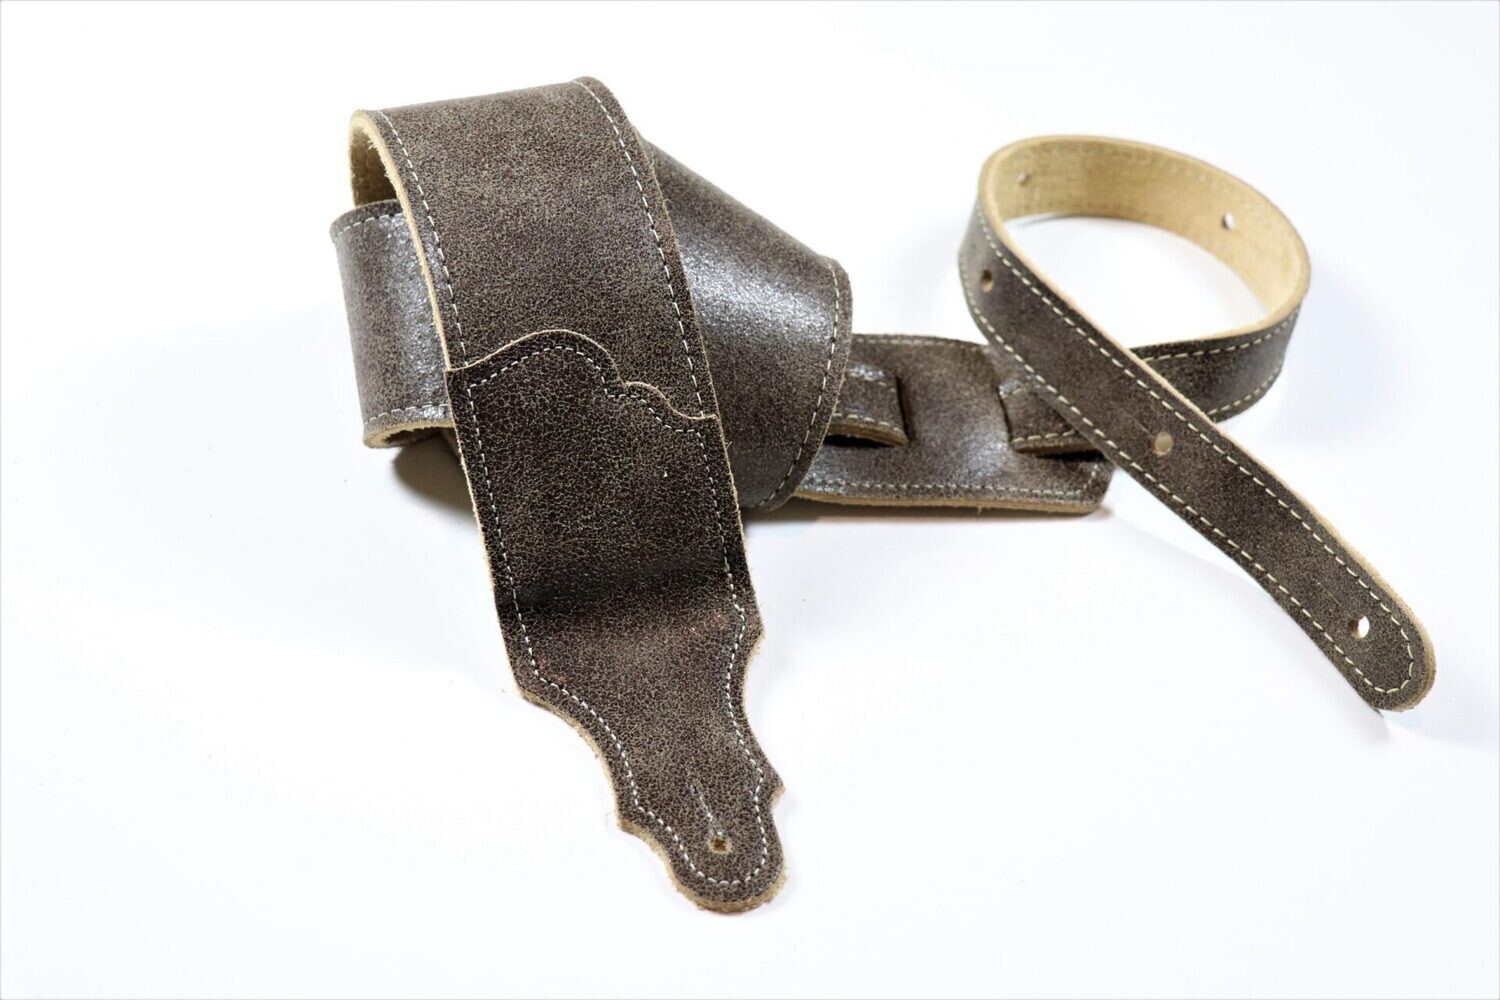 Franklin Straps 2.5" Roadhouse Distressed Leather Guitar Strap-Chocolate